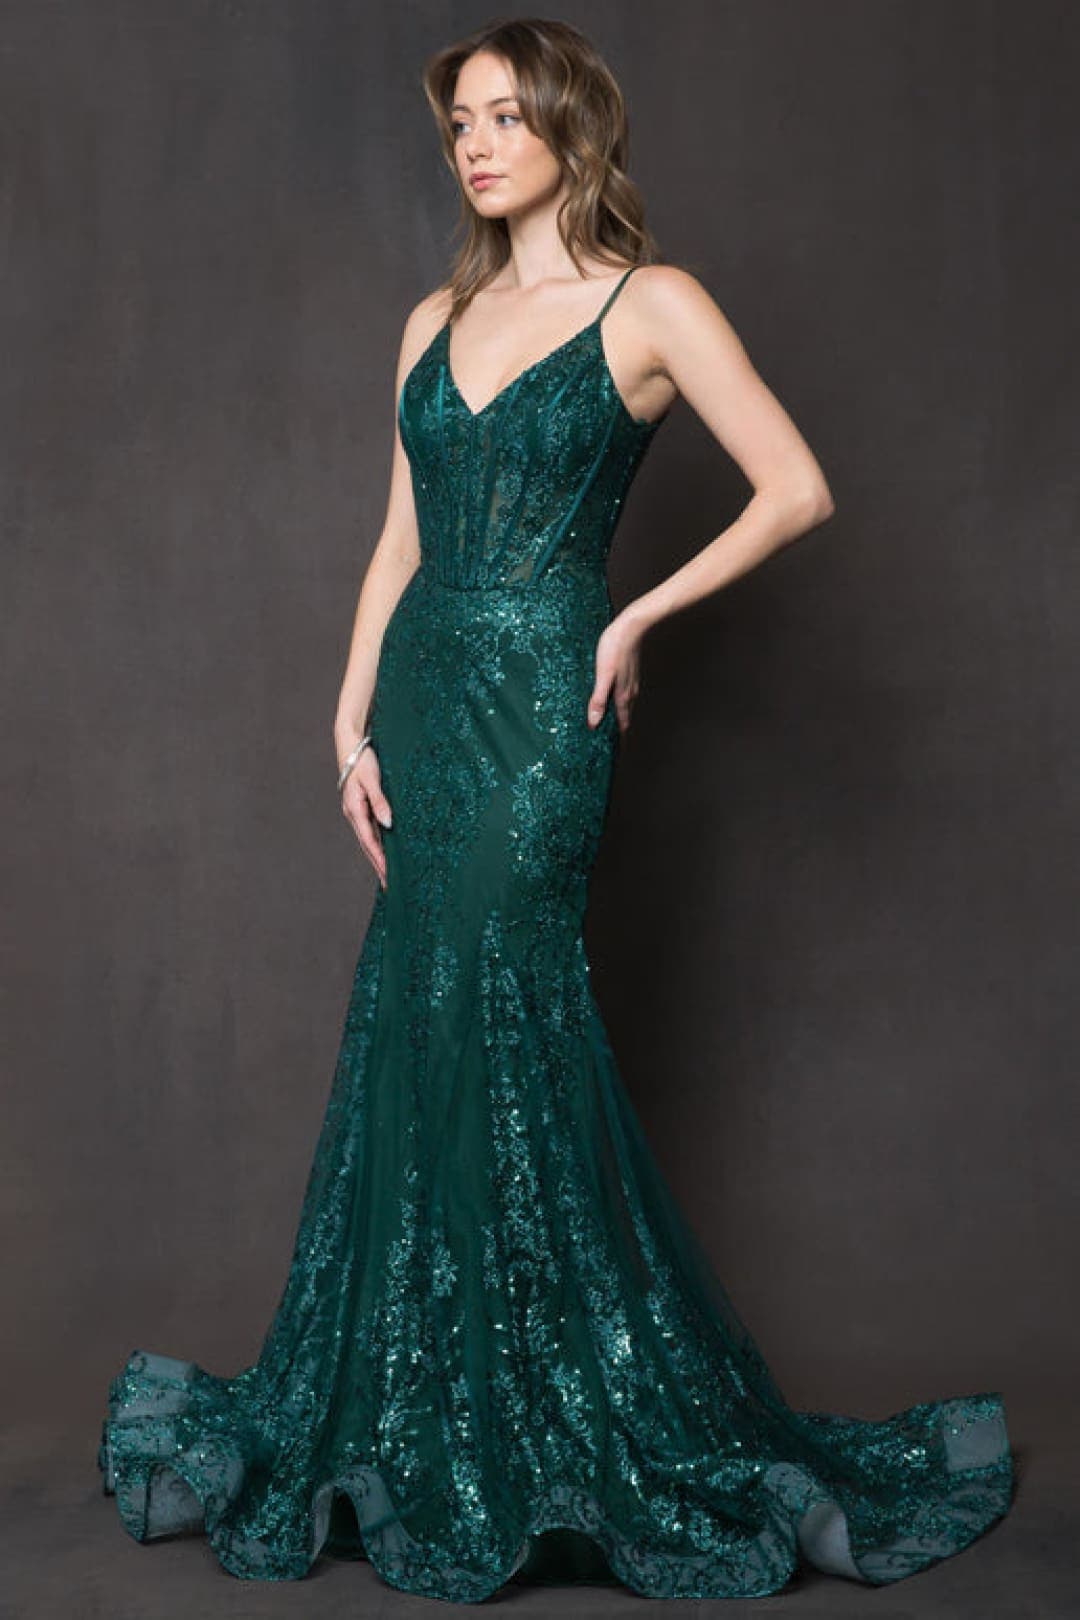 Amelia Couture BZ015 Gorgeous Prom Evening Gown - EMERALD GREEN / 4